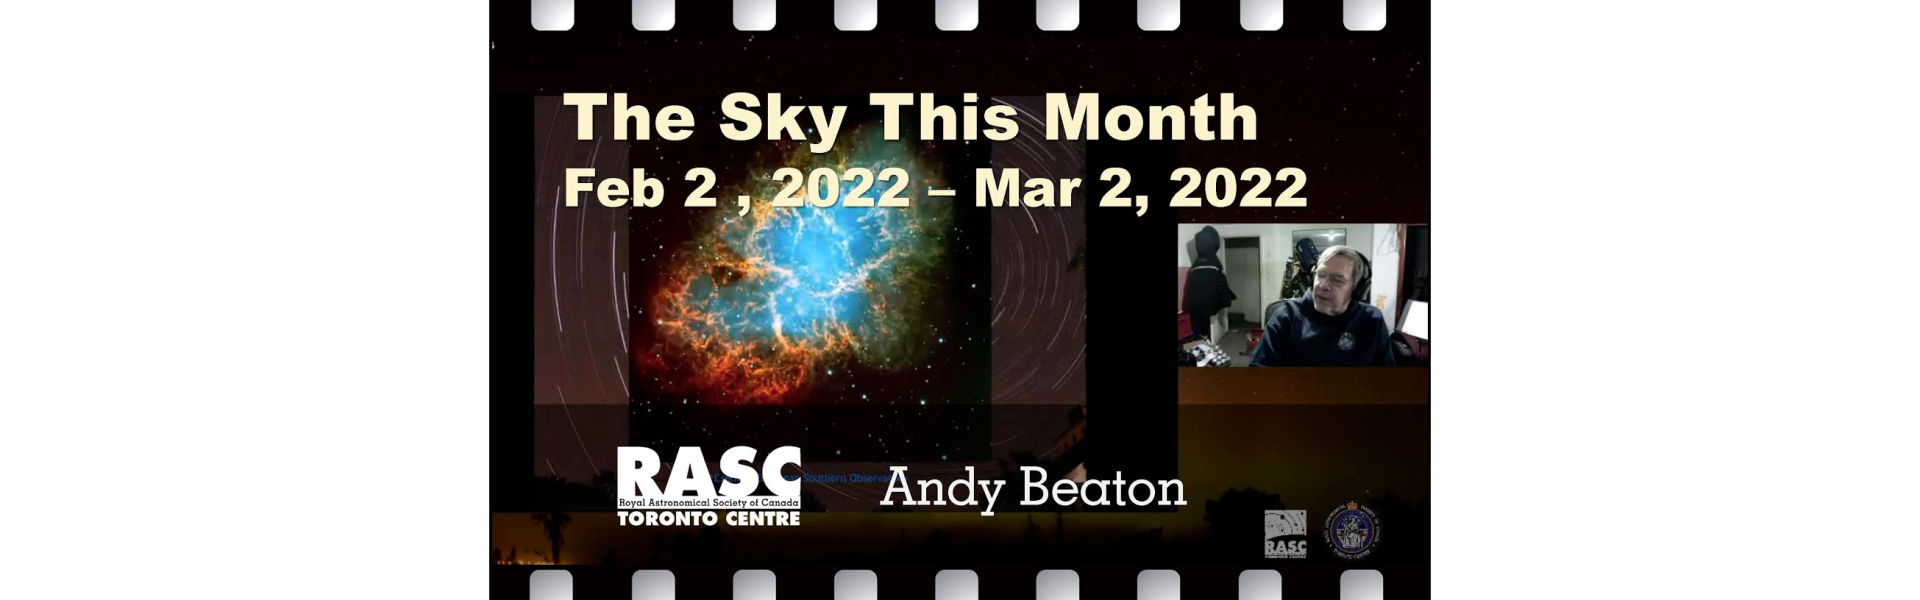 The Sky This Month Feb 2 - Mar 2, 2022 with Andy Beaton